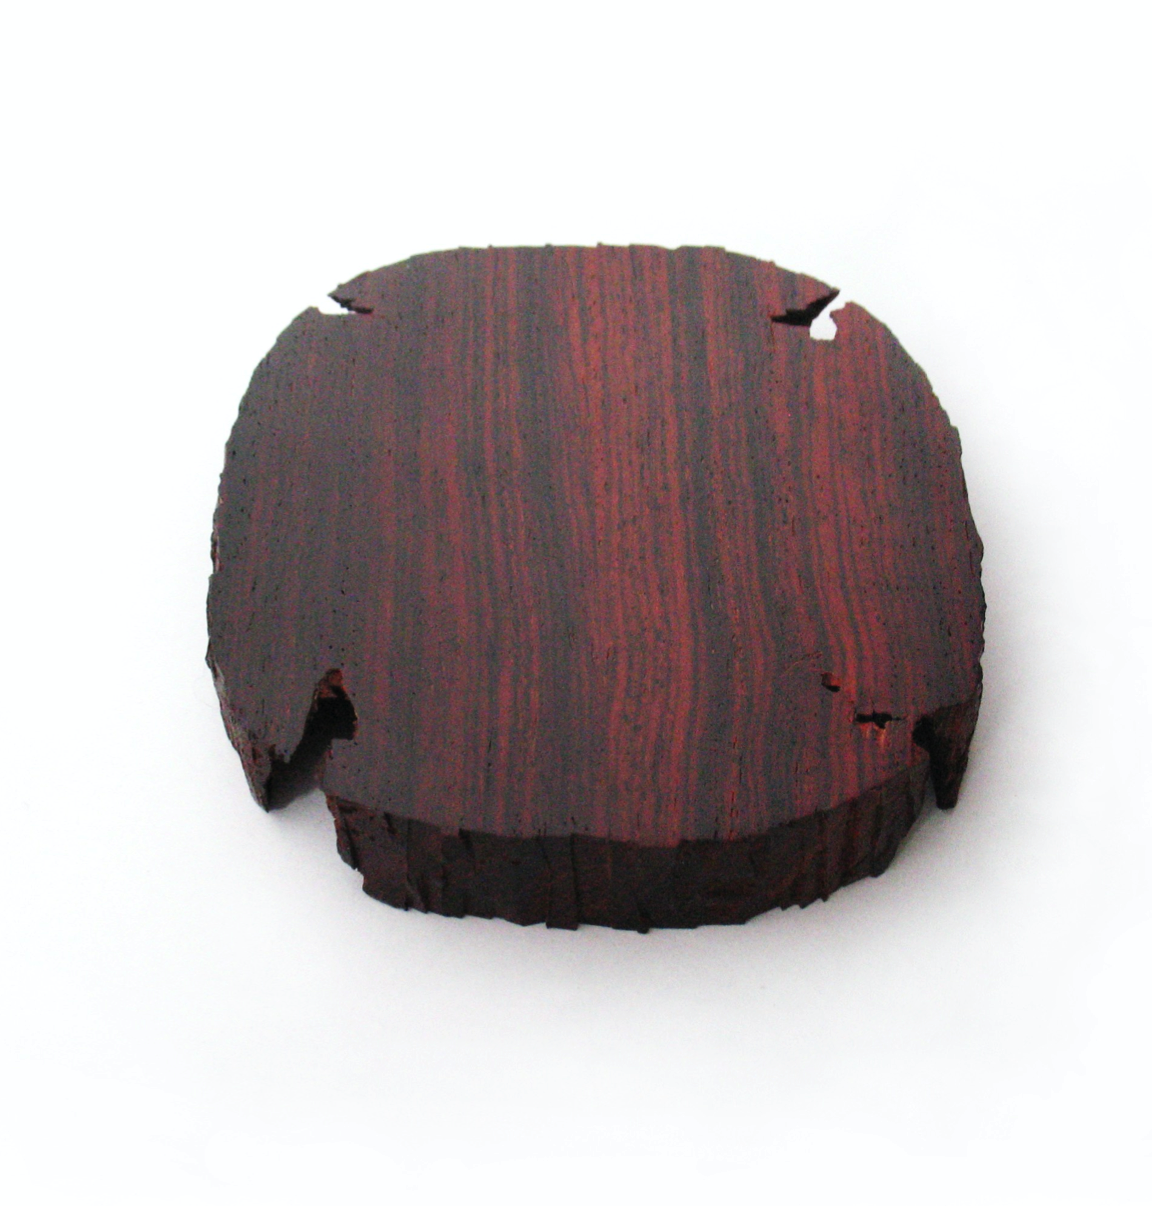 View of a brooch made of cocobolo, silver and stainless steel